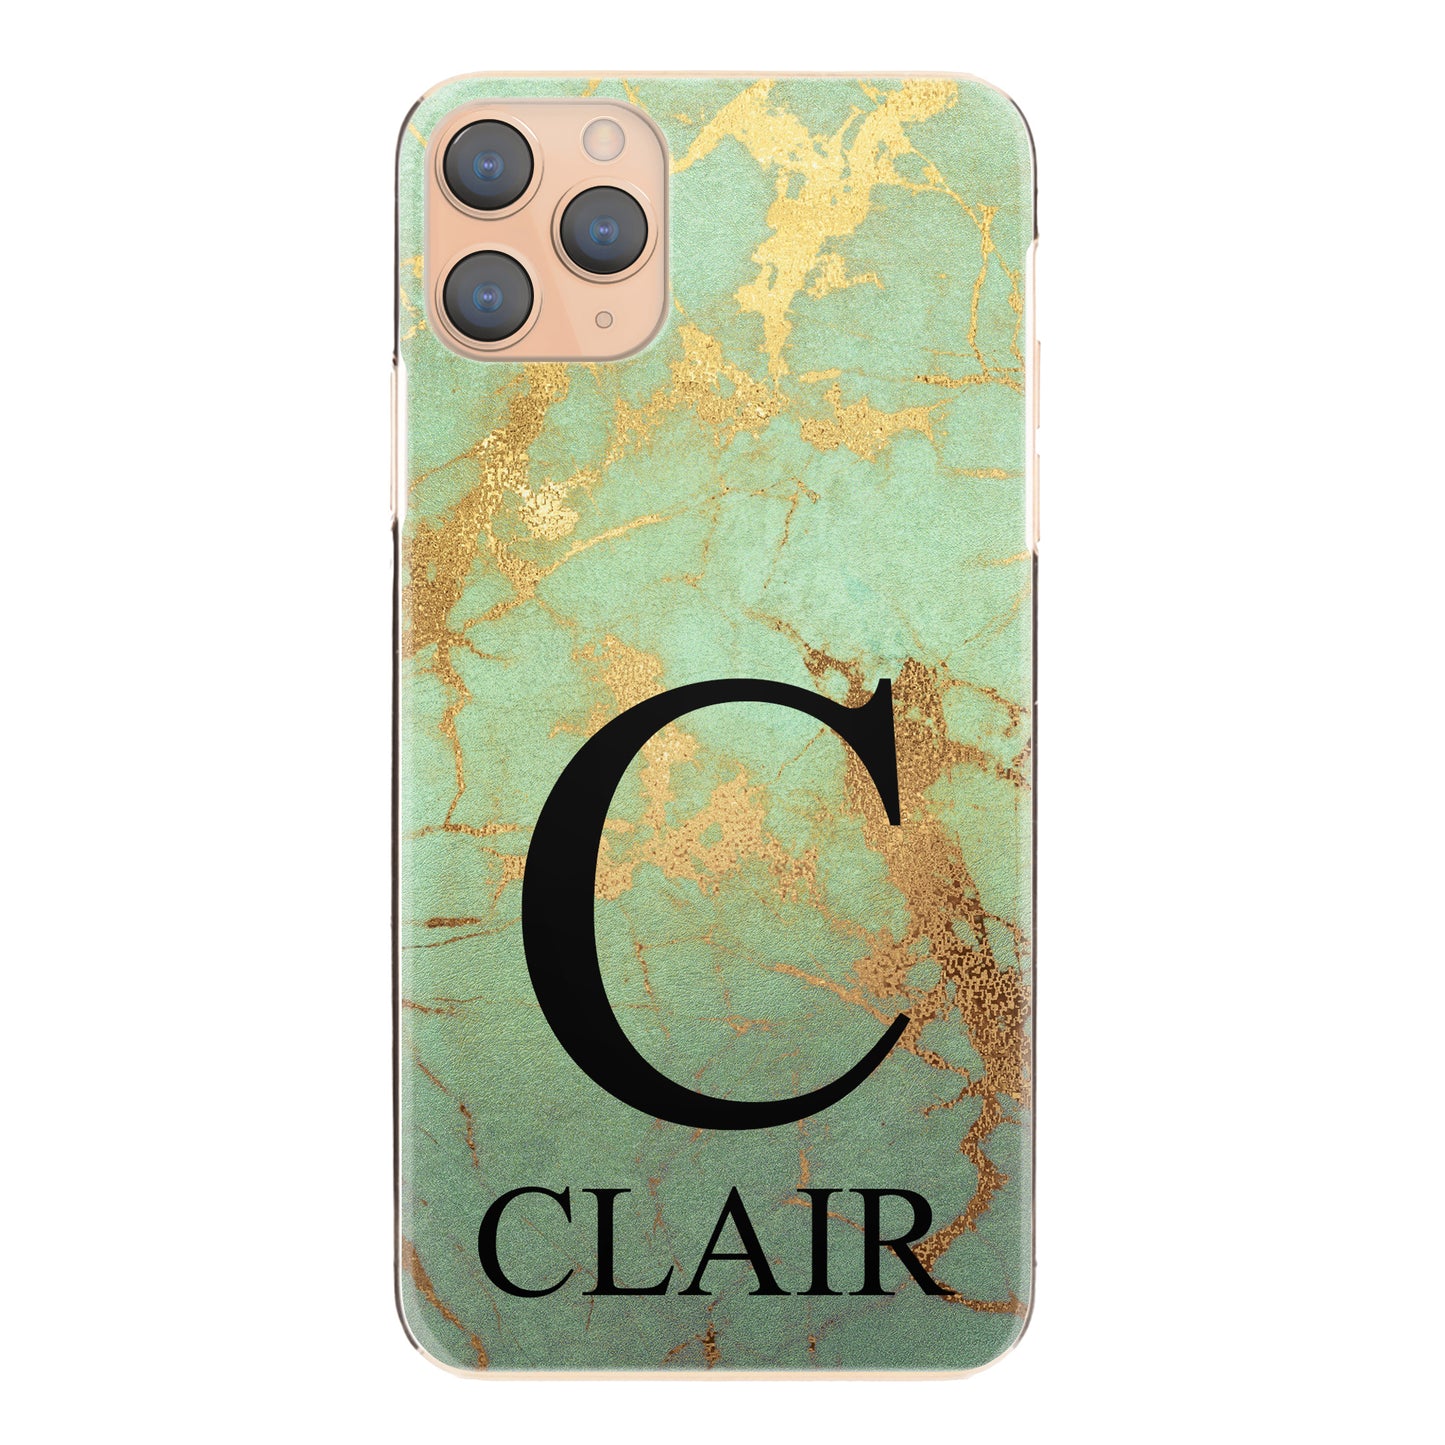 Personalised Honor Phone Hard Case with Monogram and Text on Gold Infused Green Marble